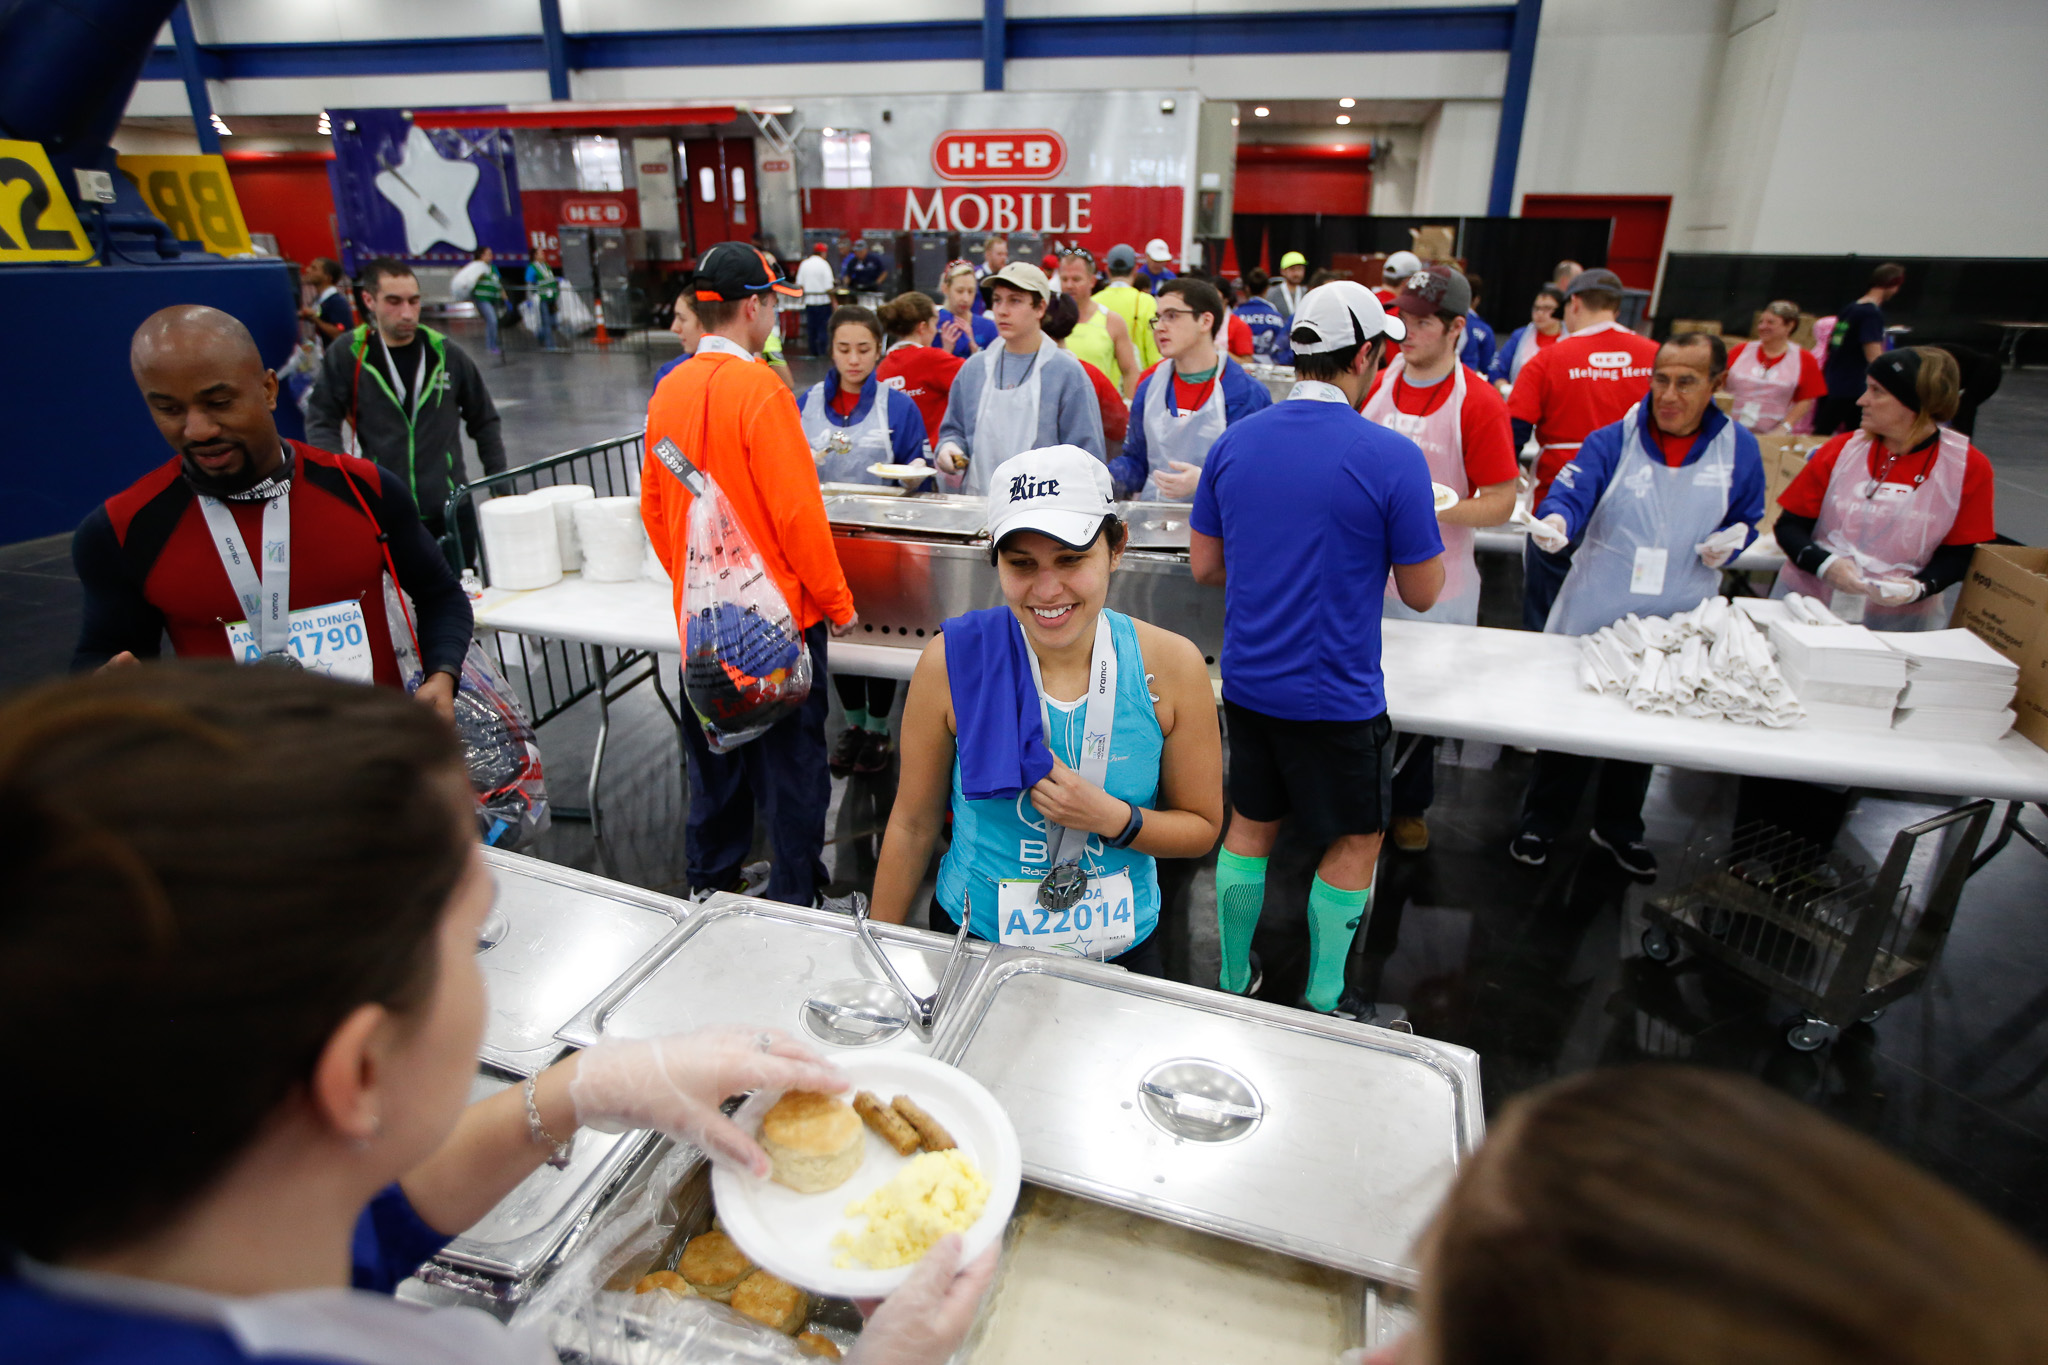 HEB partners feed thousands of Houston Chevron Marathon participants Sunday Jan. 17, 2016 in Houston at the George R. Brown Convention Center.

(Eric Kayne/For HEB)